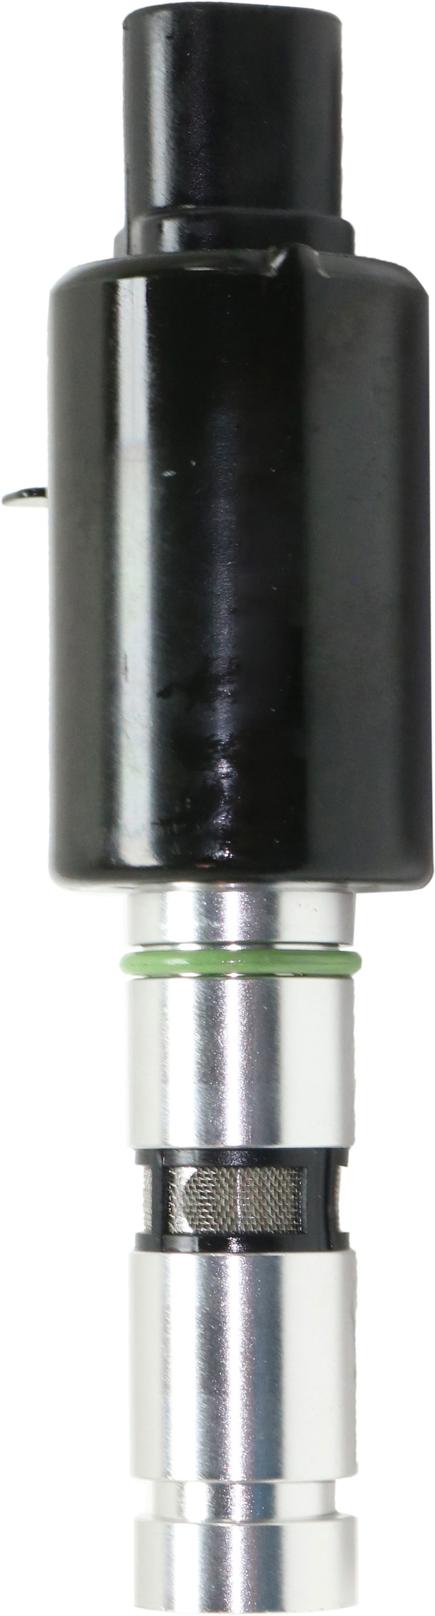 Variable Timing Solenoid Left Single - Replacement 2006 Sonata 6 Cyl 3.3L